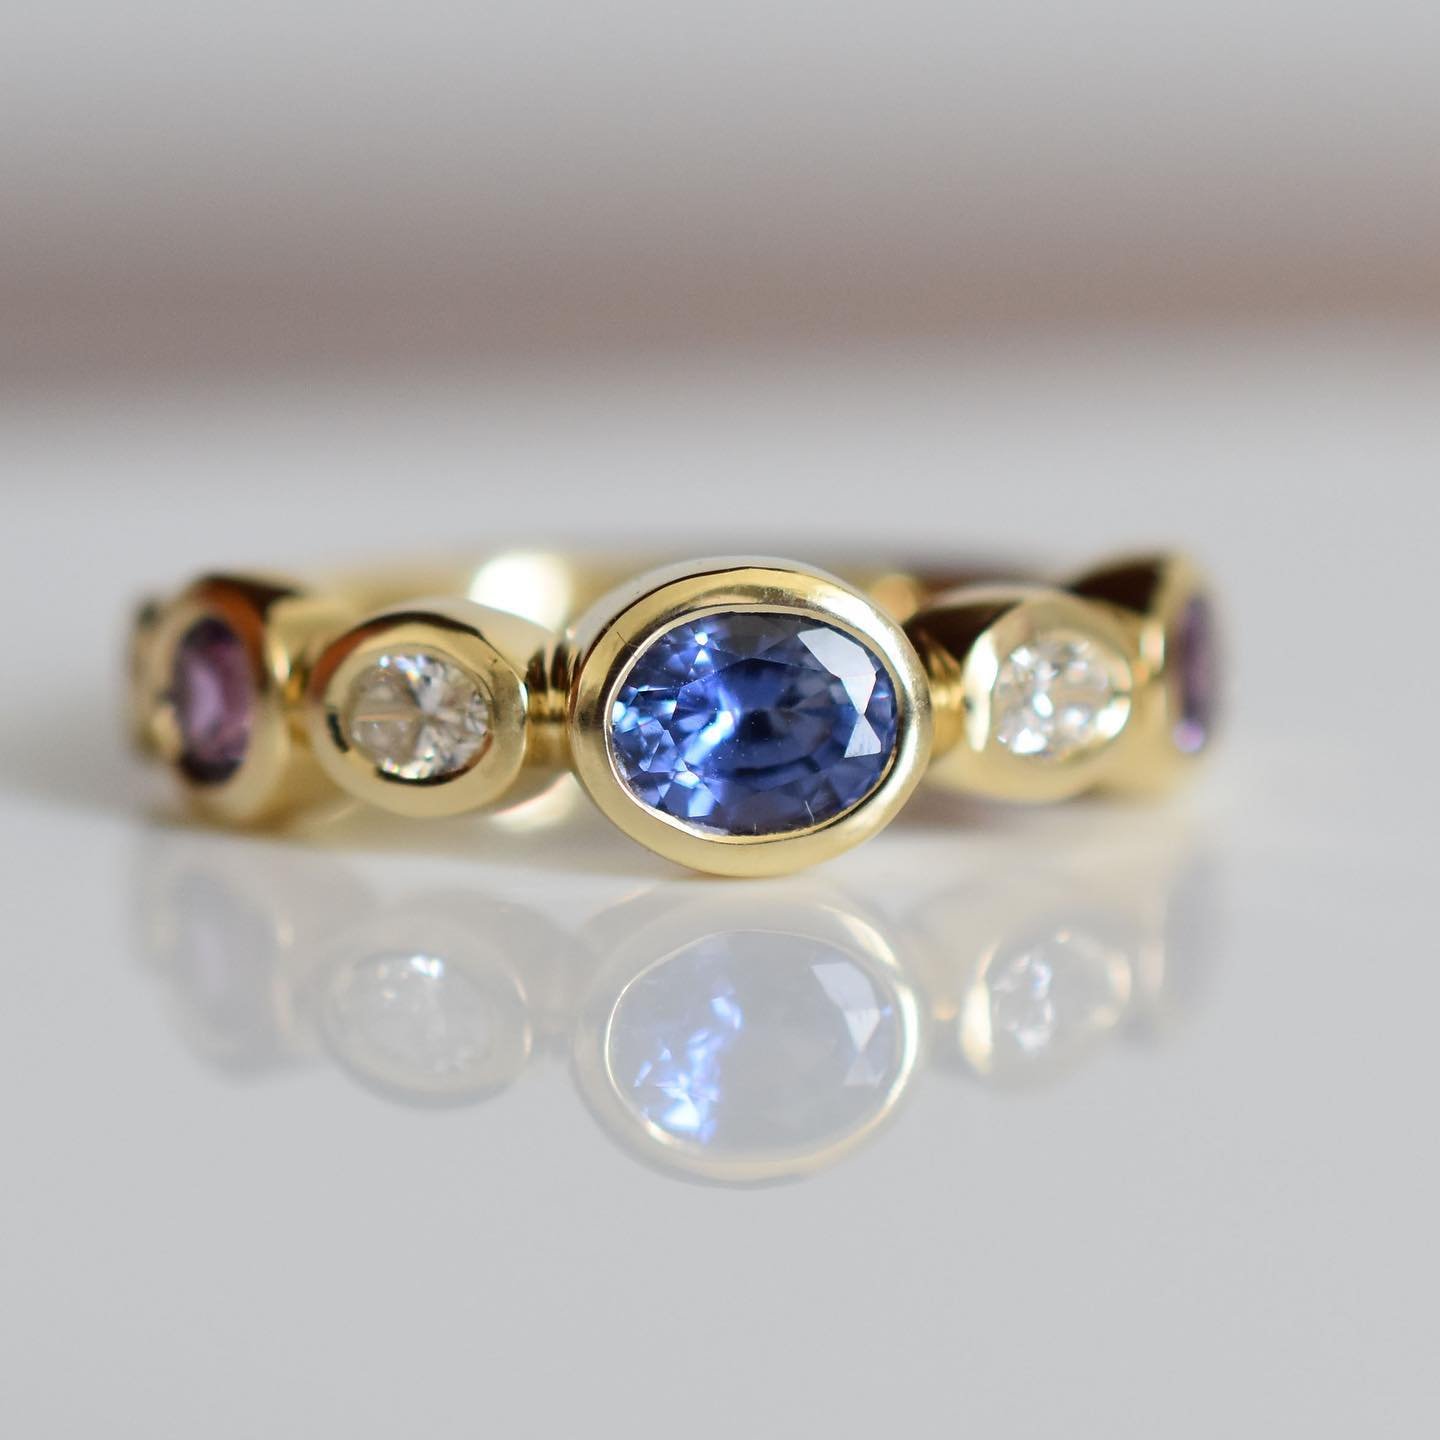 I have an amazing client that loves my bezel set jewellery and last summer we came up with this design together pushing blue sapphires around in a meeting. I loved her ring so much, I made a black and white diamond version I named Luna, and now most 